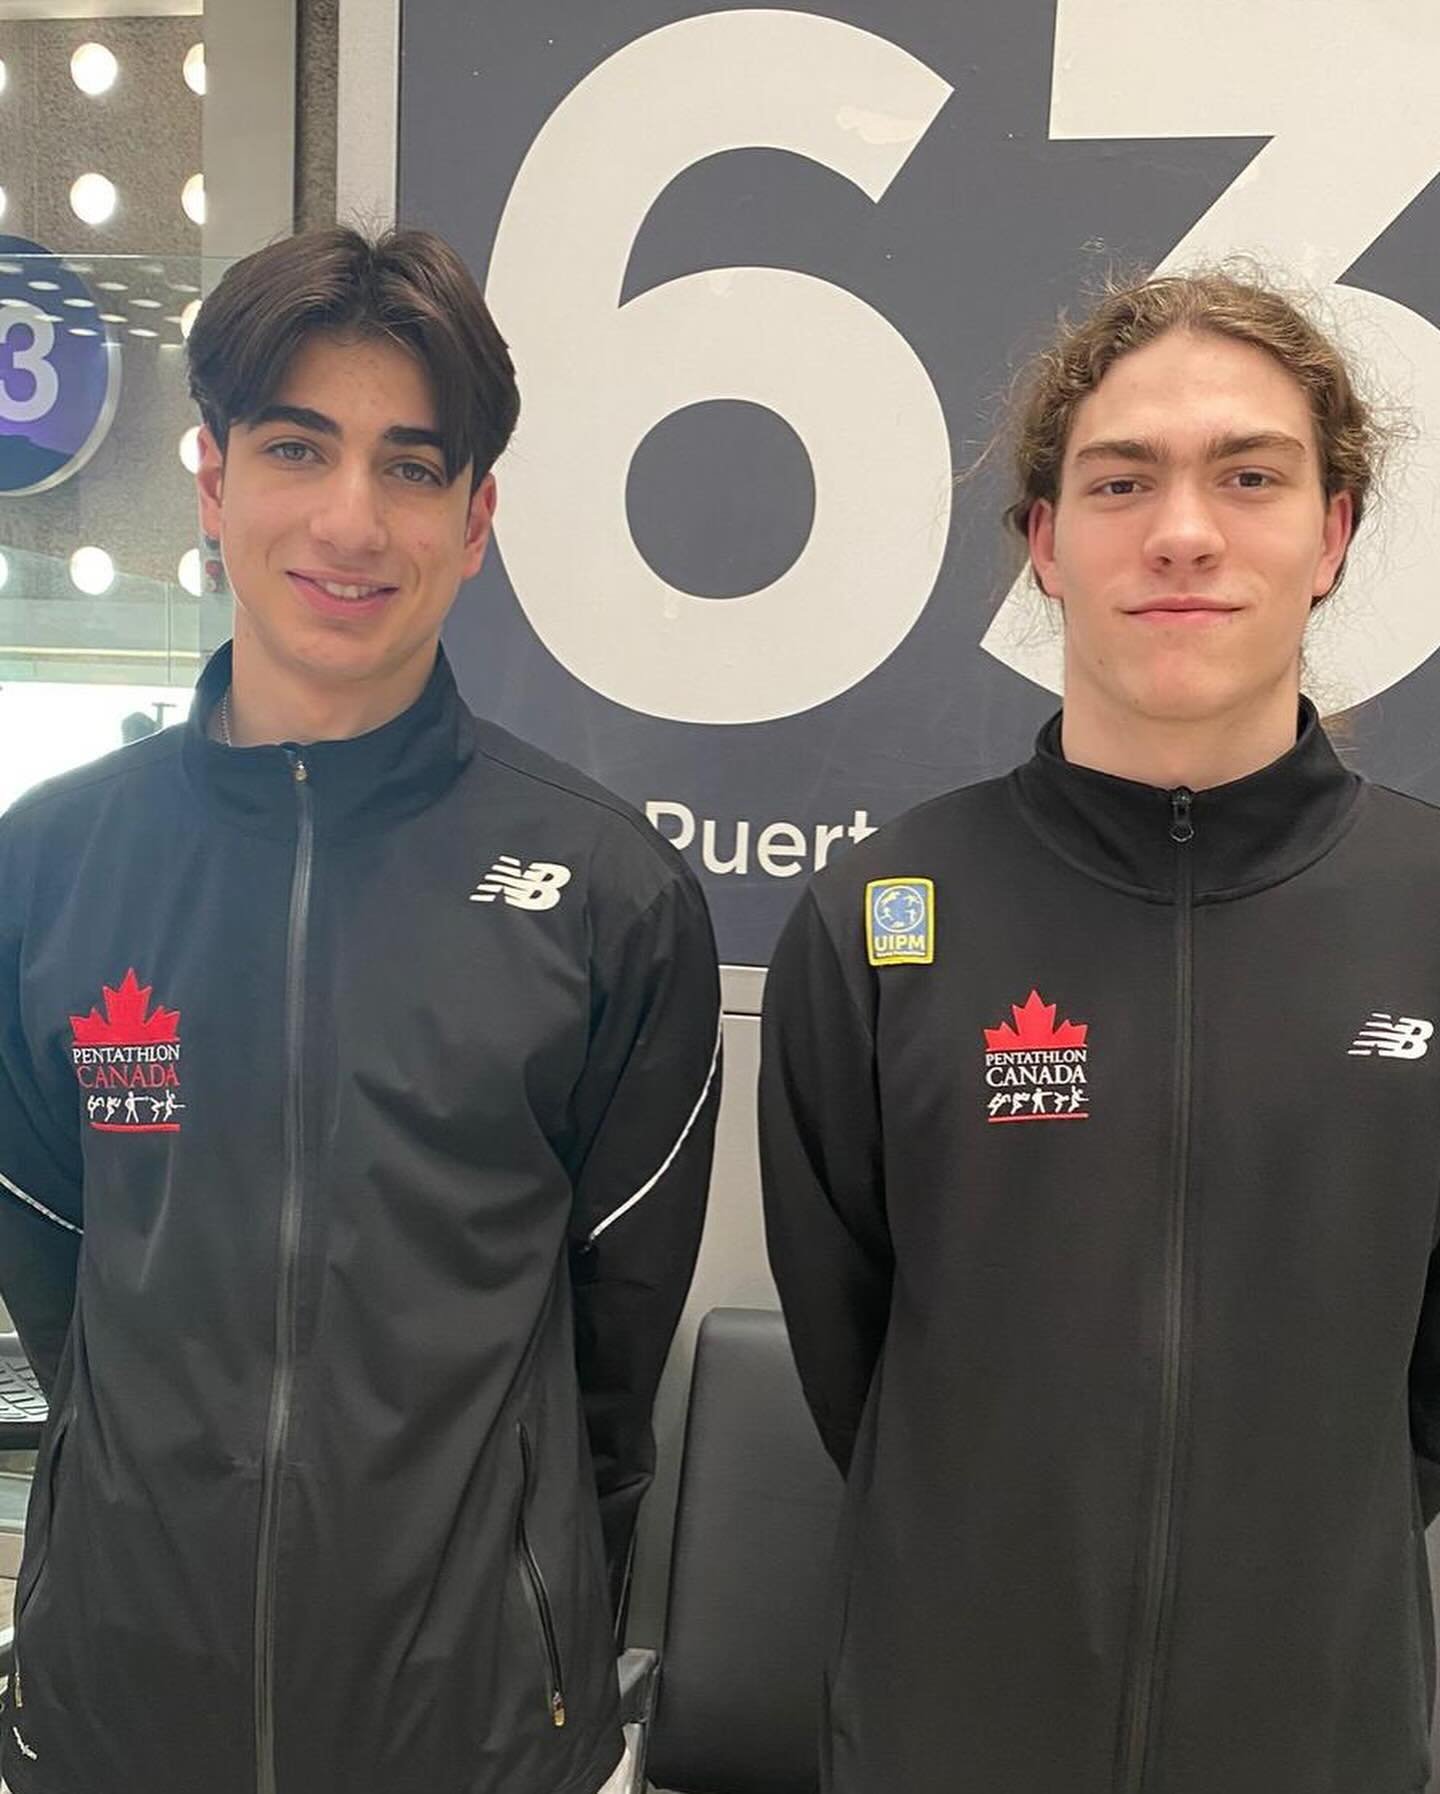 ✈️ 🌎 🌍 
Good luck to athletes competing this week!

Quinn Schulz is at World Cup 4 in Sofia, BUL 🇧🇬 

Emmett Gosche &amp; Abraham Khalil are at the Pan Am Triathle &amp; Obstacle Laser Run Champs in Veradero, CUB 🇨🇺 

Good luck Coaches Rosario 